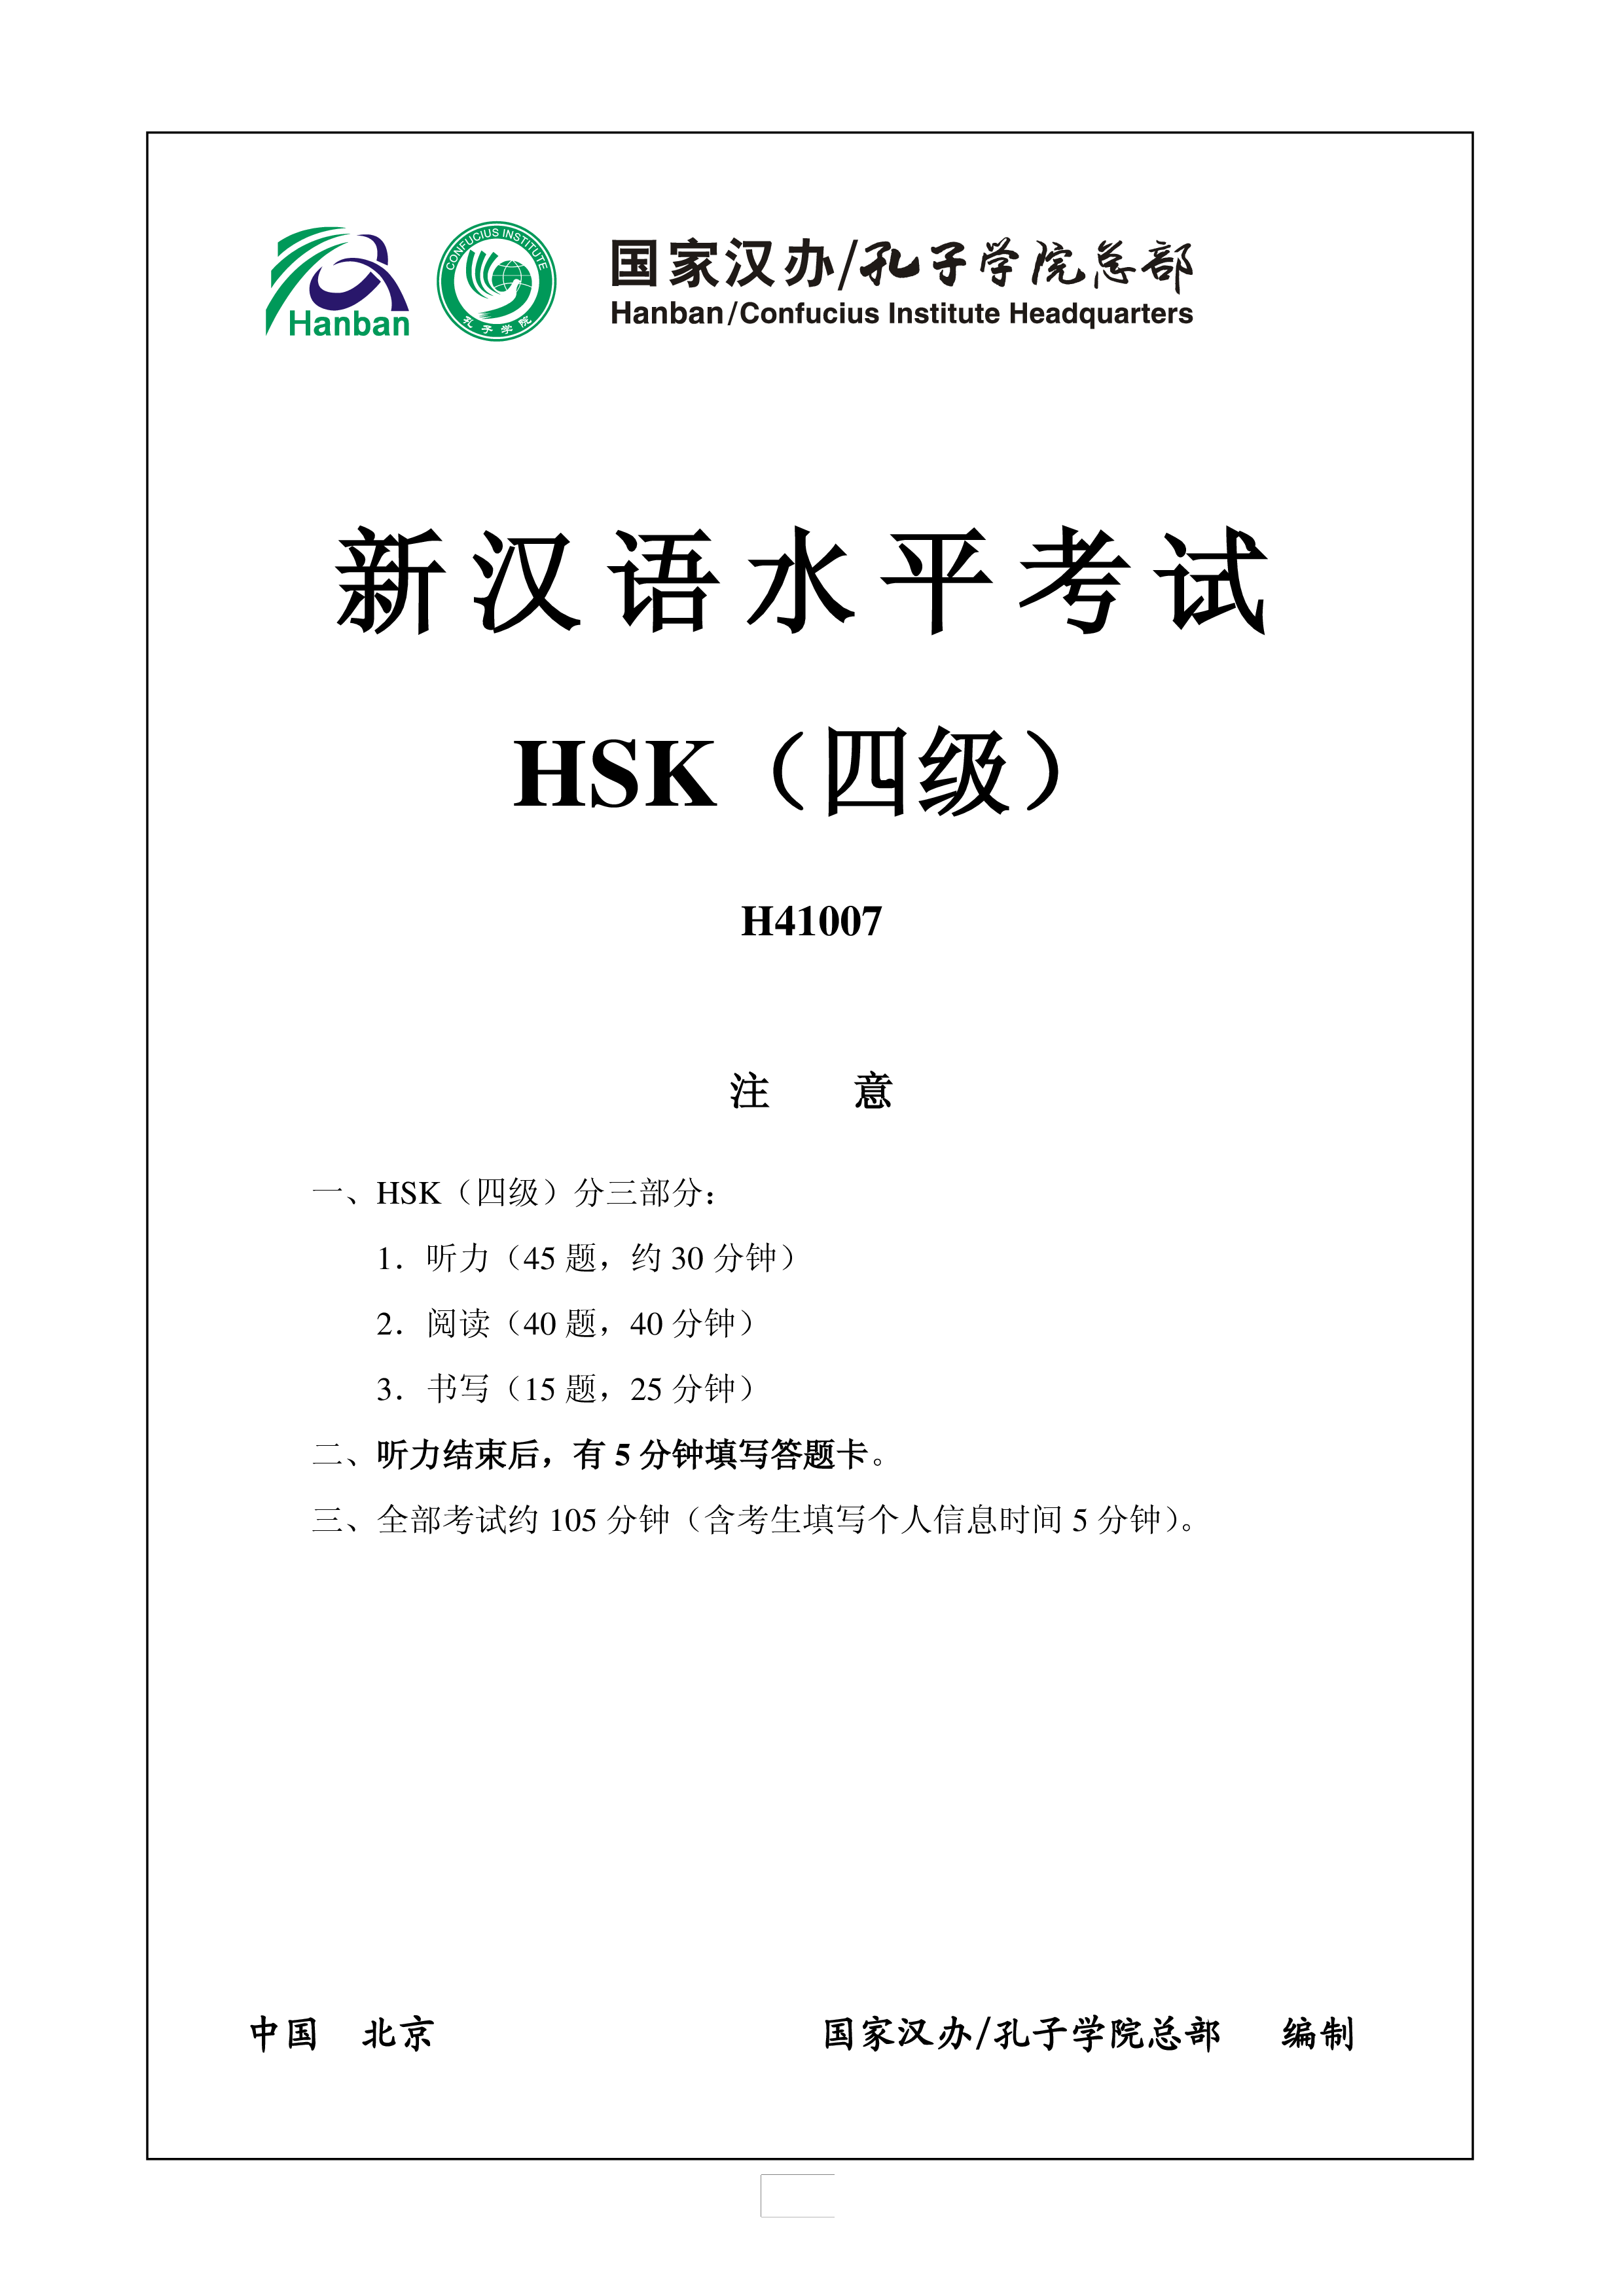 h41007 chinese exam hsk 4 incl audio and answers template